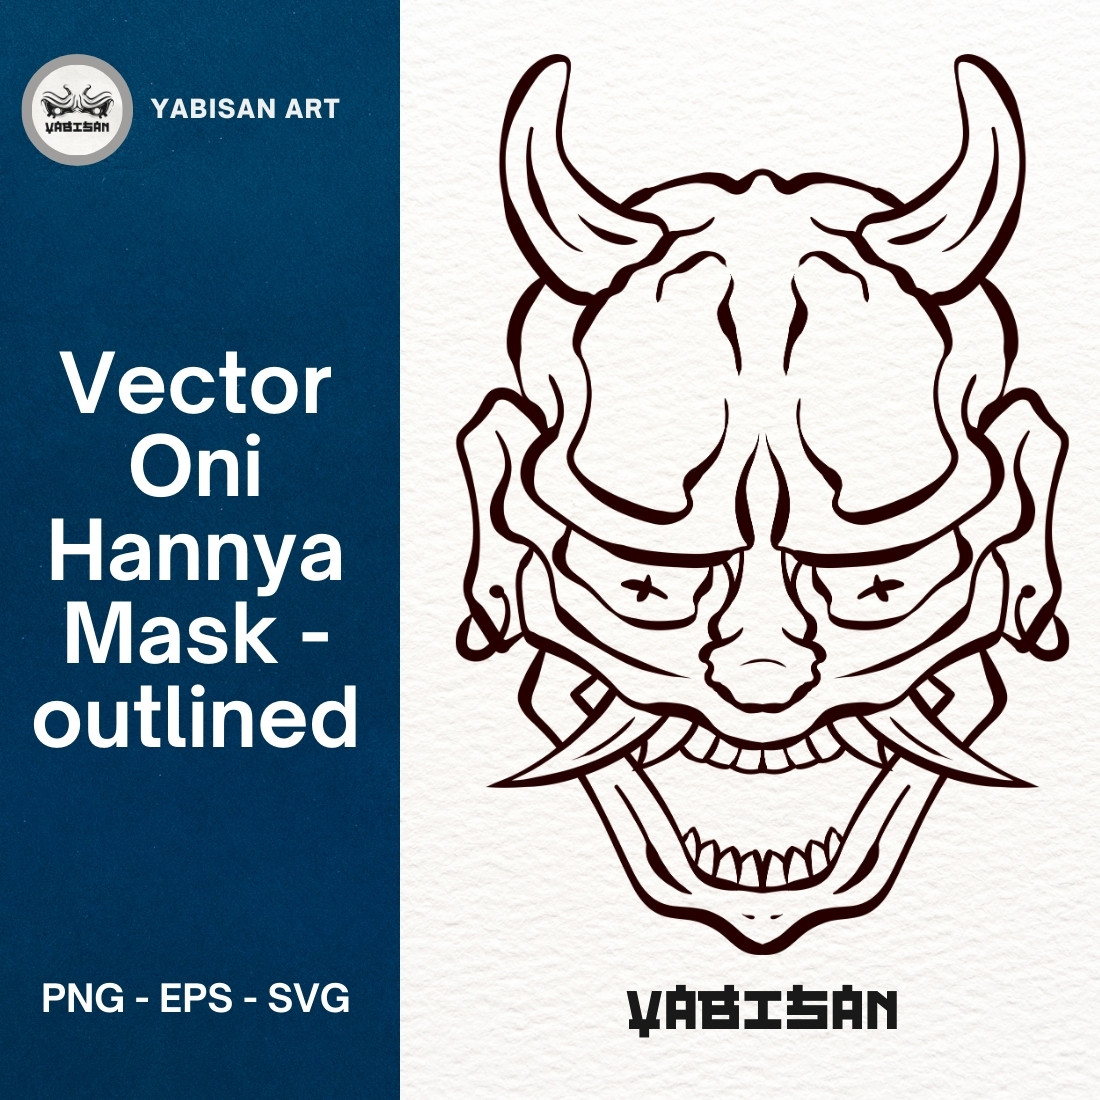 Oni Hannya Mask Art 4 – Outlined preview image.